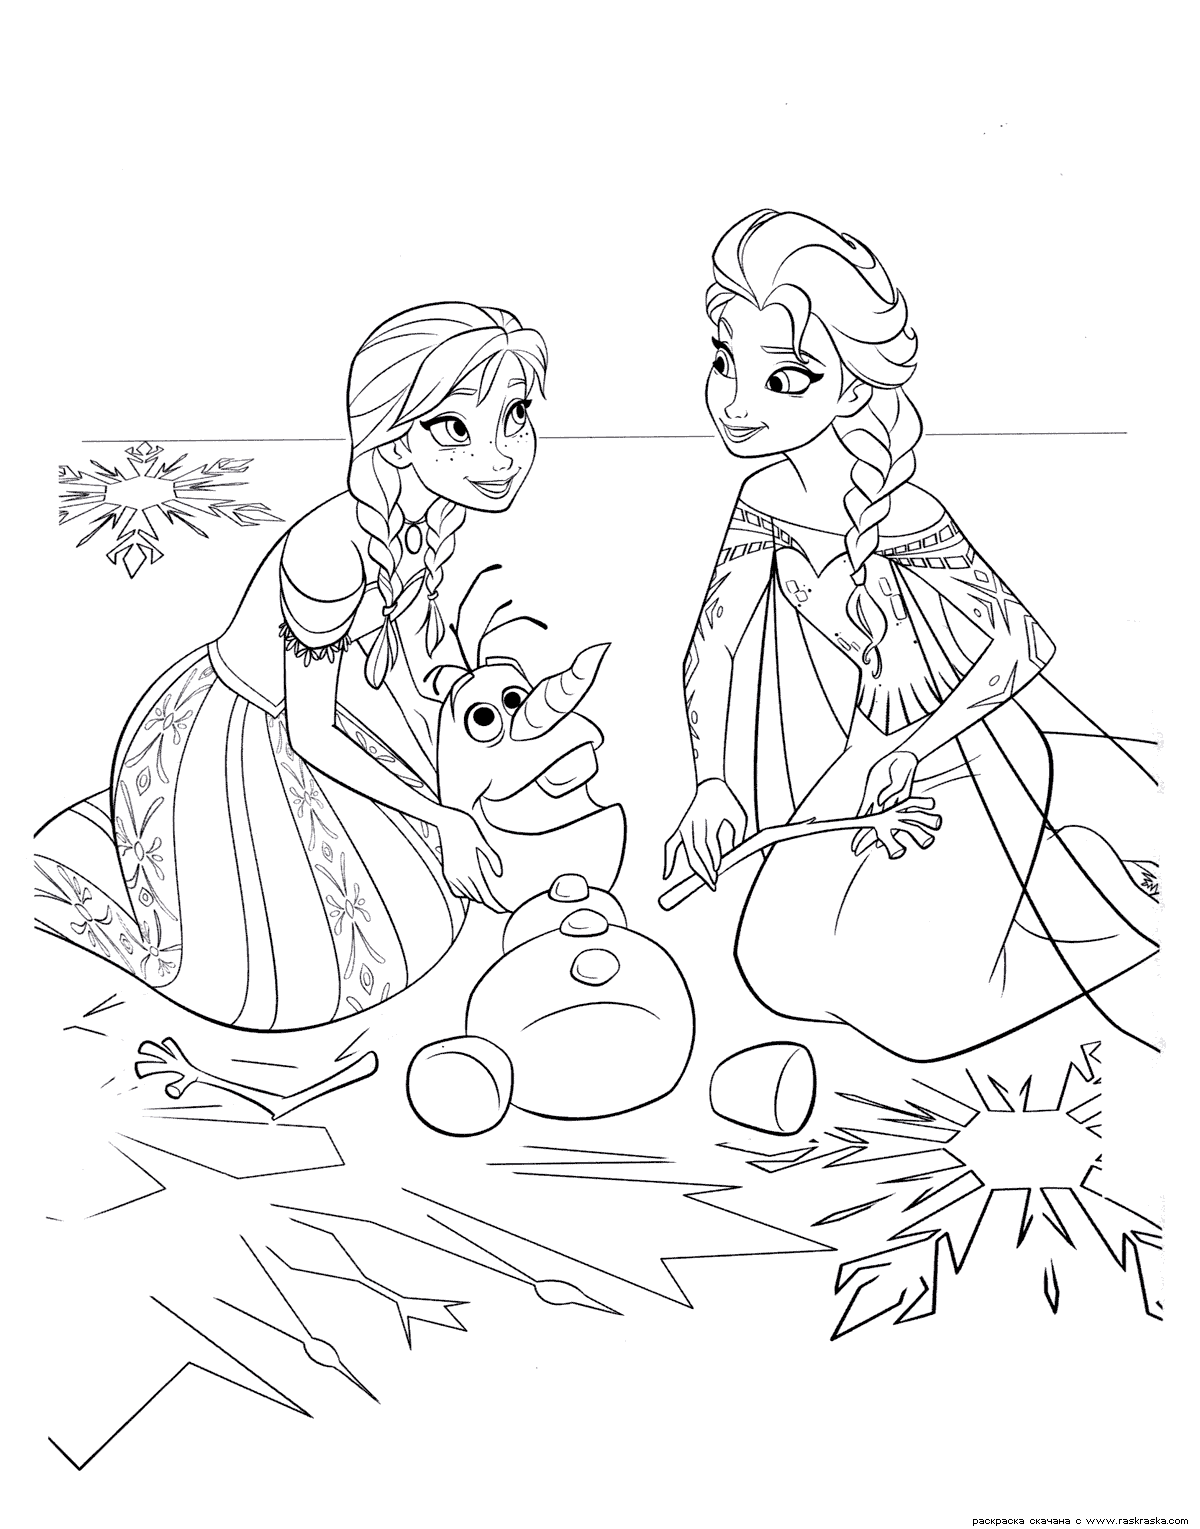 frozen coloring pages free free printable frozen coloring pages for kids best frozen pages coloring free 1 1